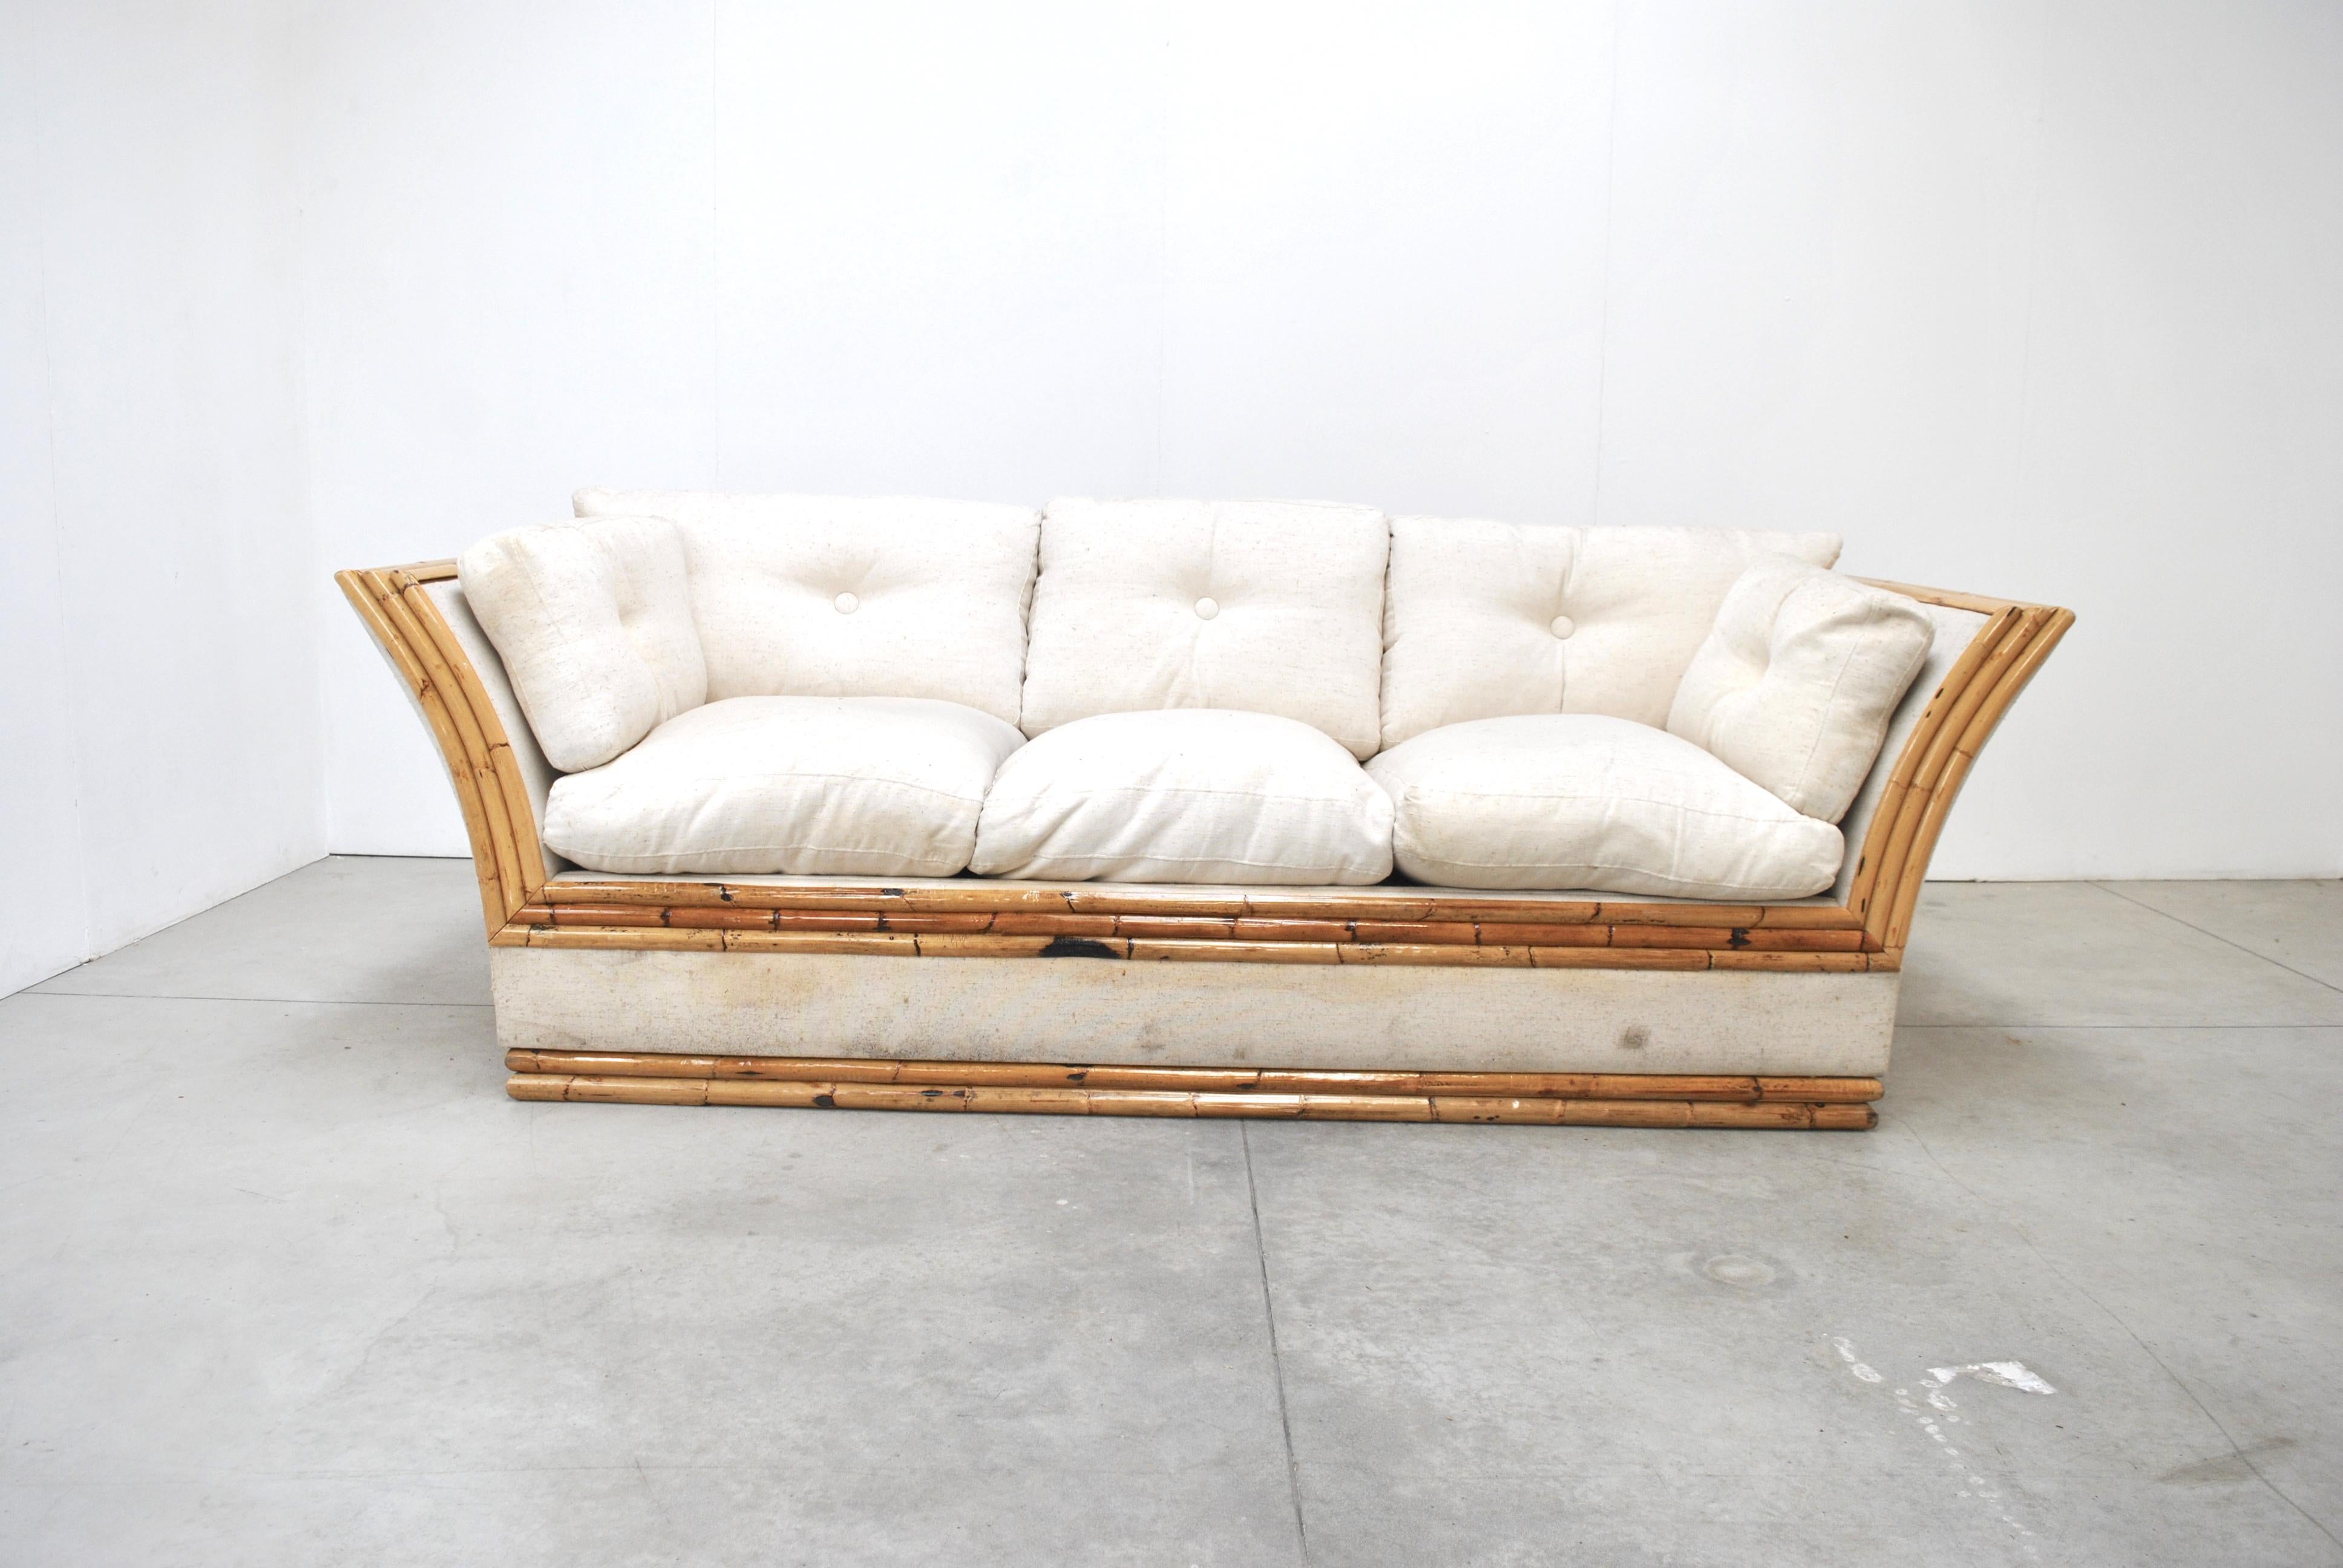 Elegant Italian three-seat sofa in bamboo by Vivai del Sud.
The structure is intact but needs reupholster.
These fabric on this sofa are customized. We have our own in-house upholstery studio that can expertly reupholster this piece. If you wish